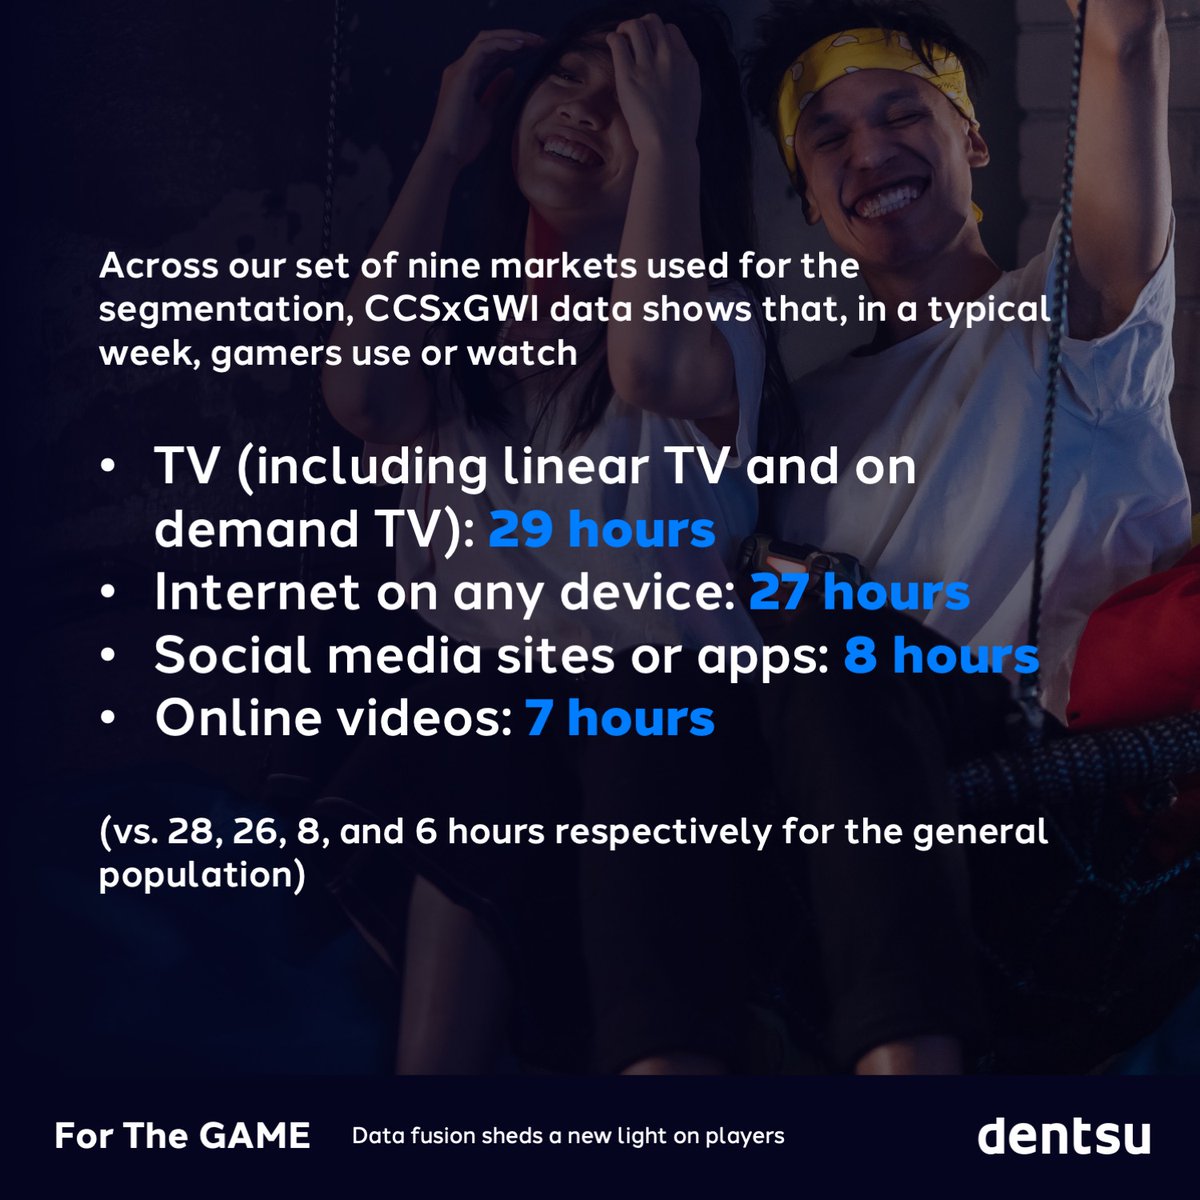 #Gamers do not live solely for #gaming & are big consumers of all sorts of media. In our newest report, For the Game, we leverage our unique intelligence to share insights into gaming audiences & help brands navigate the #gamingindustry. fal.cn/3tc9P #dentsugaming